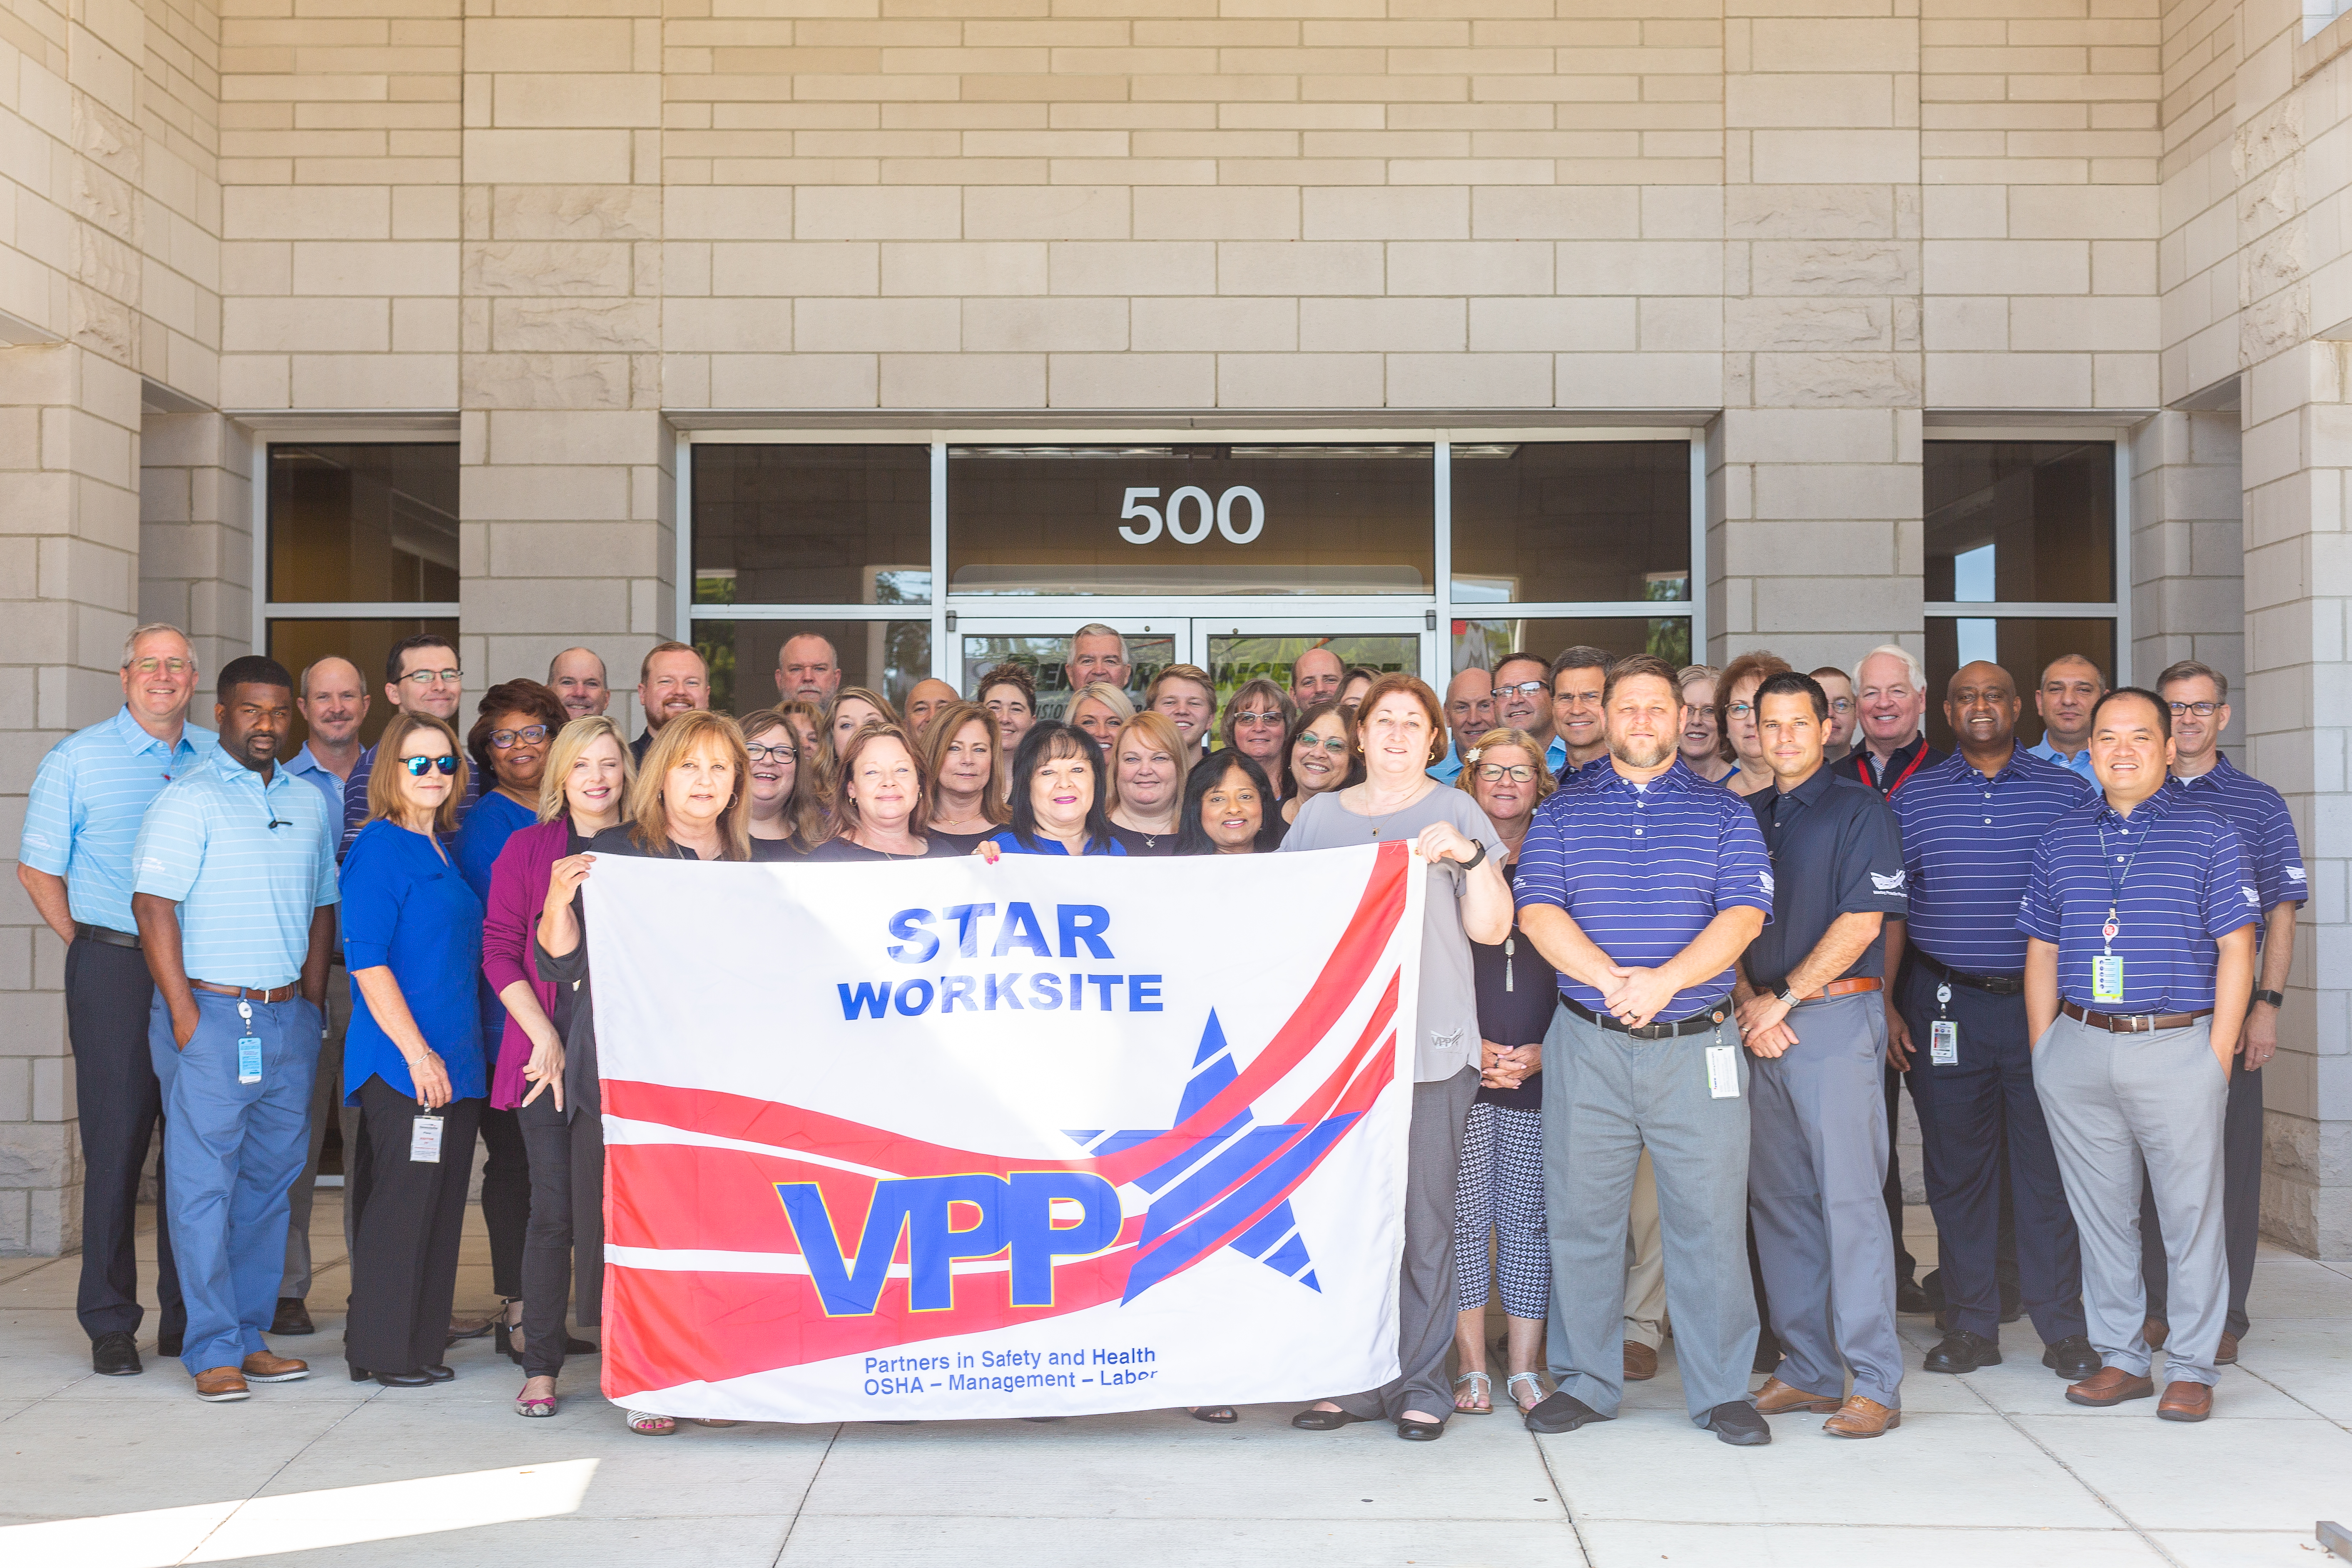  Chevron Phillips Chemical’s Performance Pipe division office in Plano earns VPP Star status